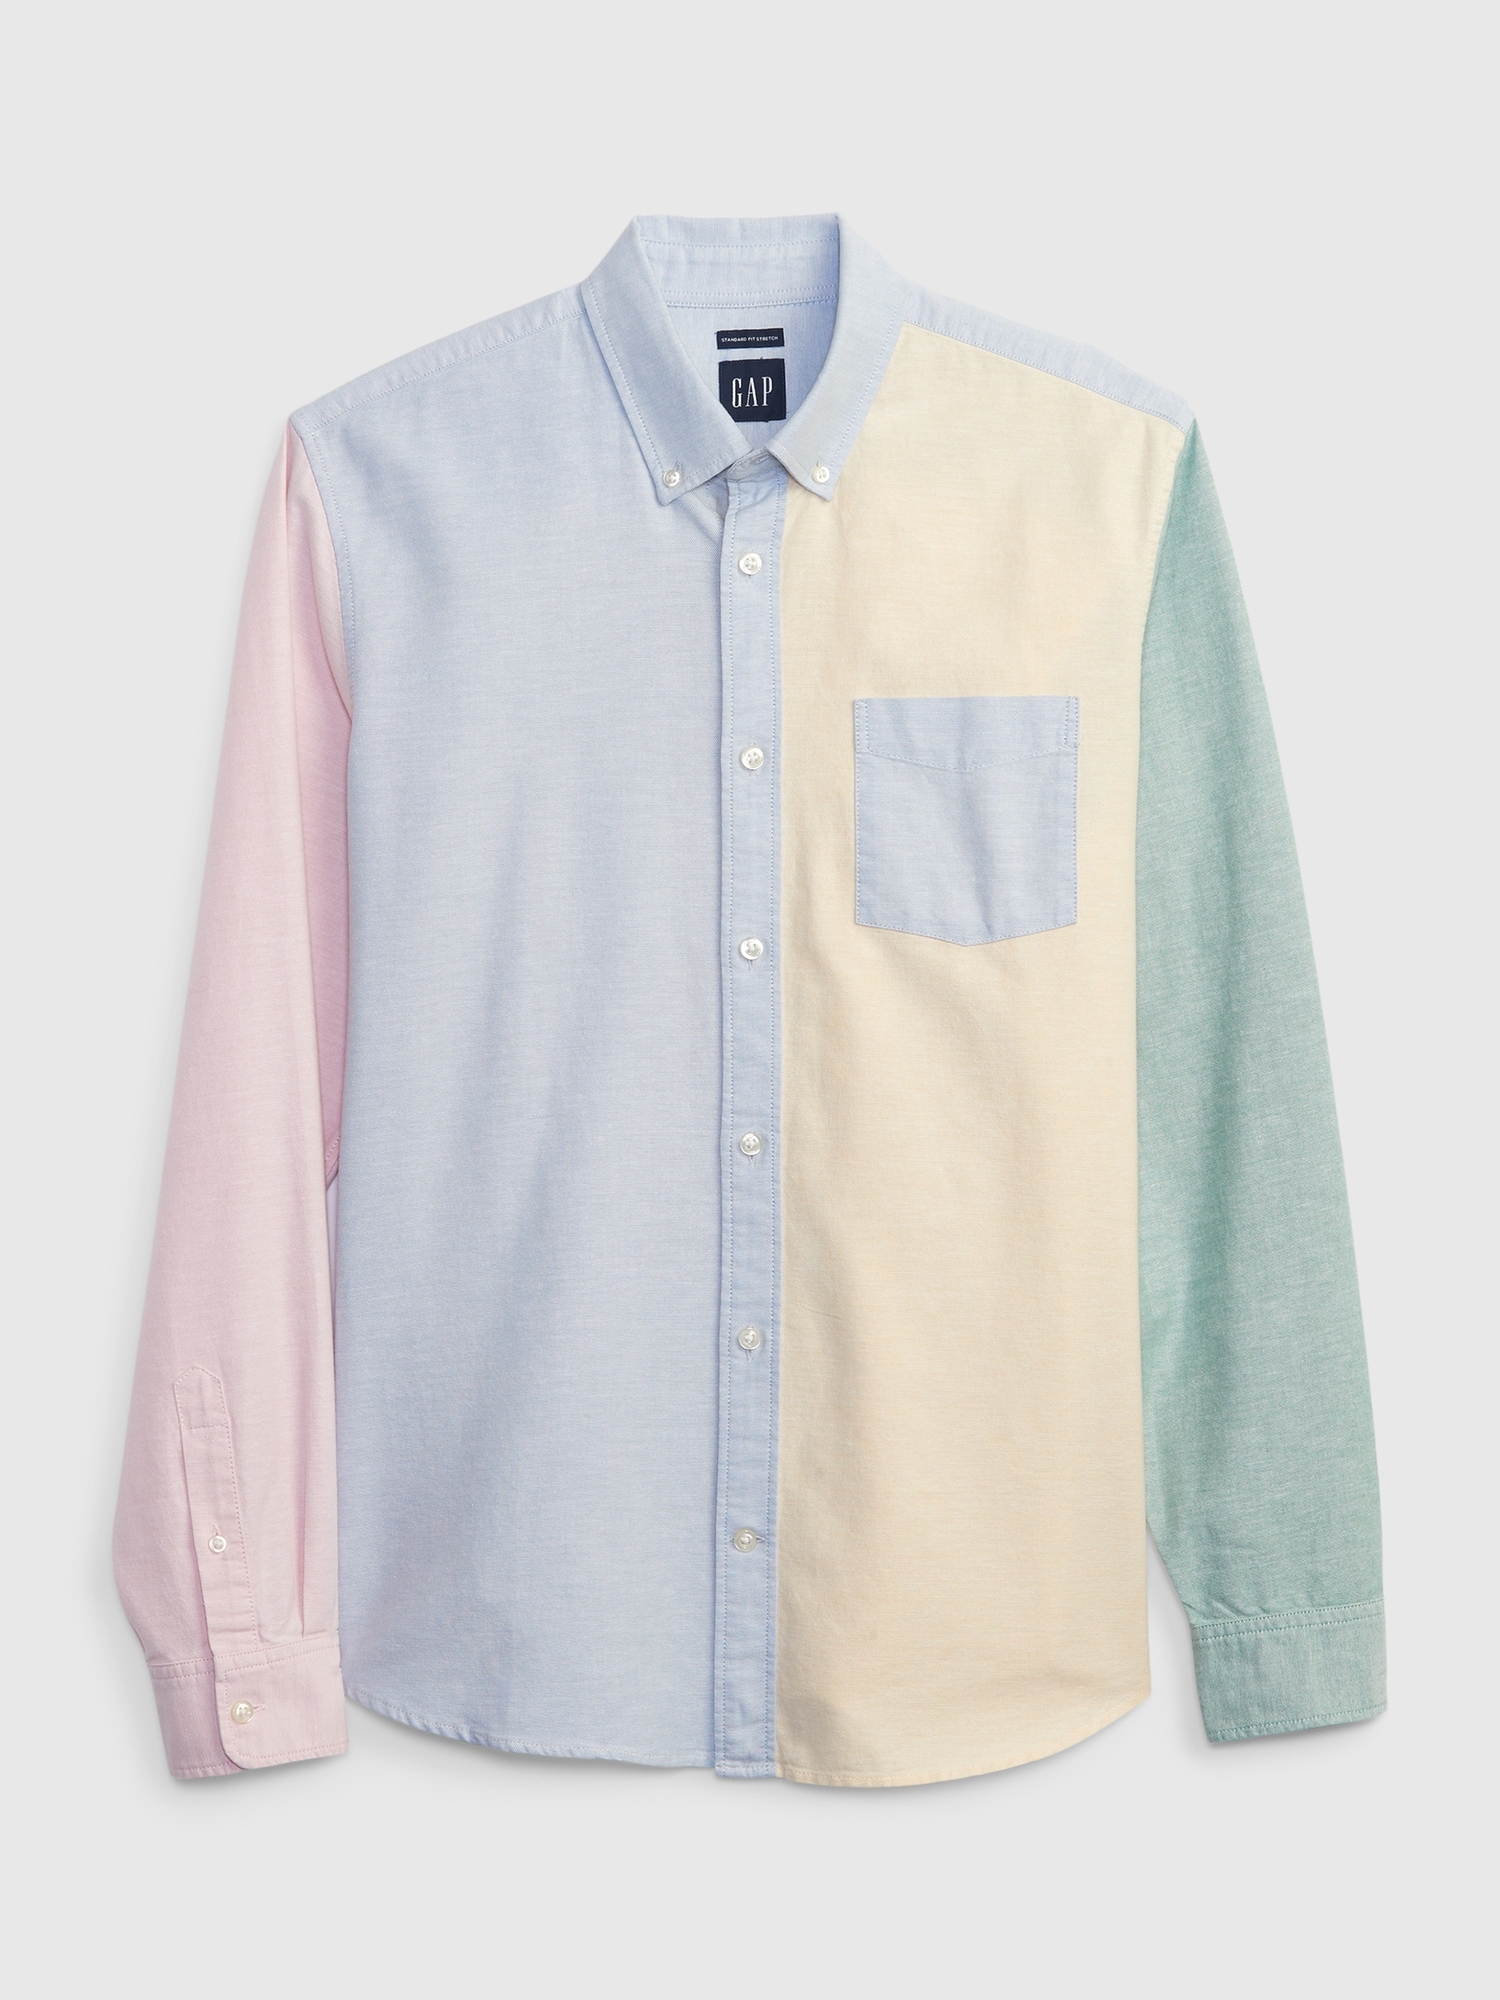 Classic Colorblock Oxford Shirt in Standard Fit with In-Conversion